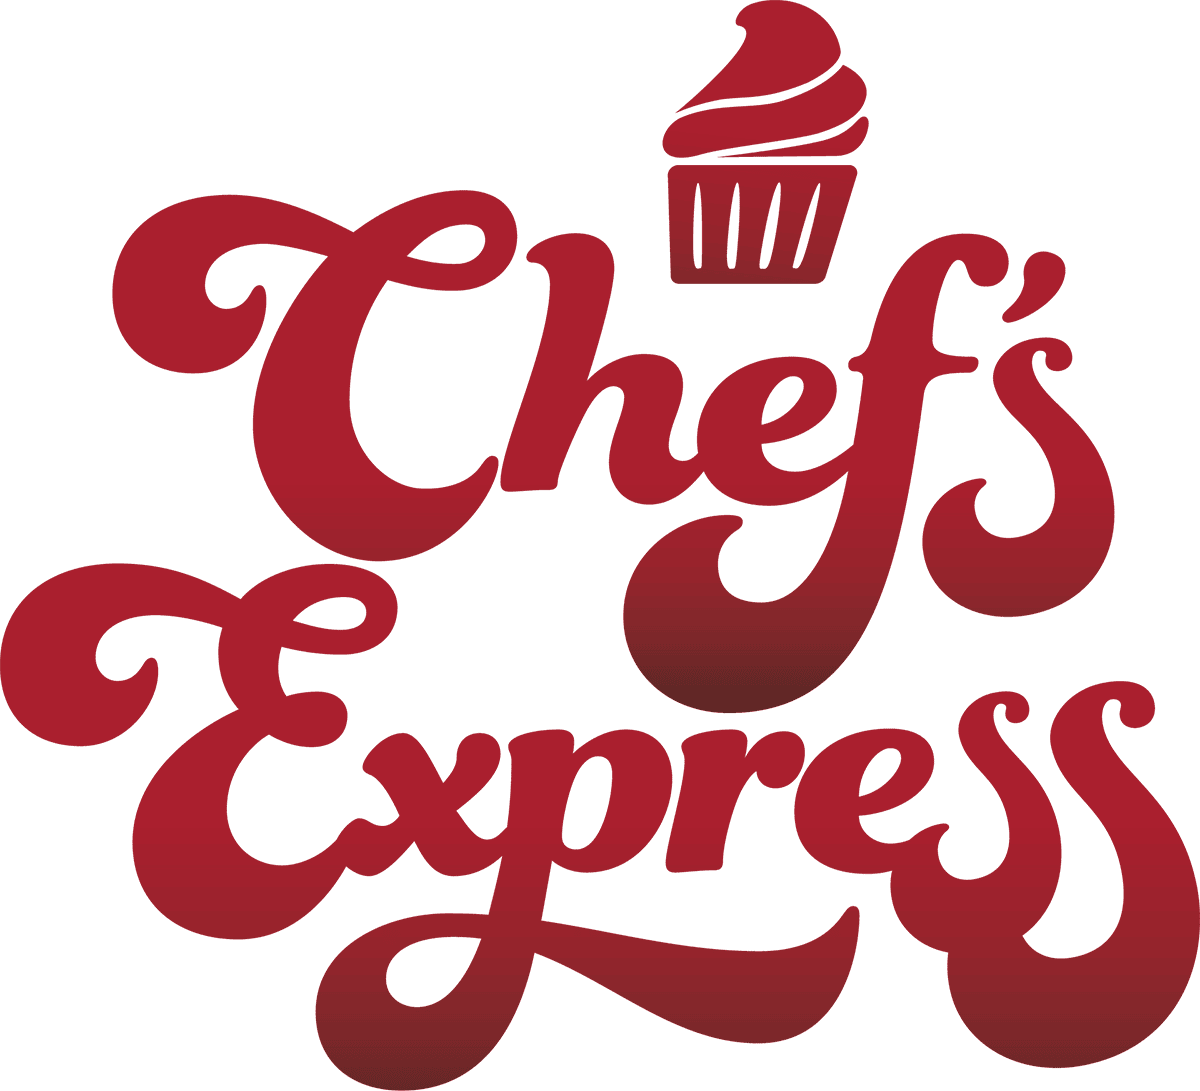 Chef's Express | The Arc Oneida-Lewis Chapter